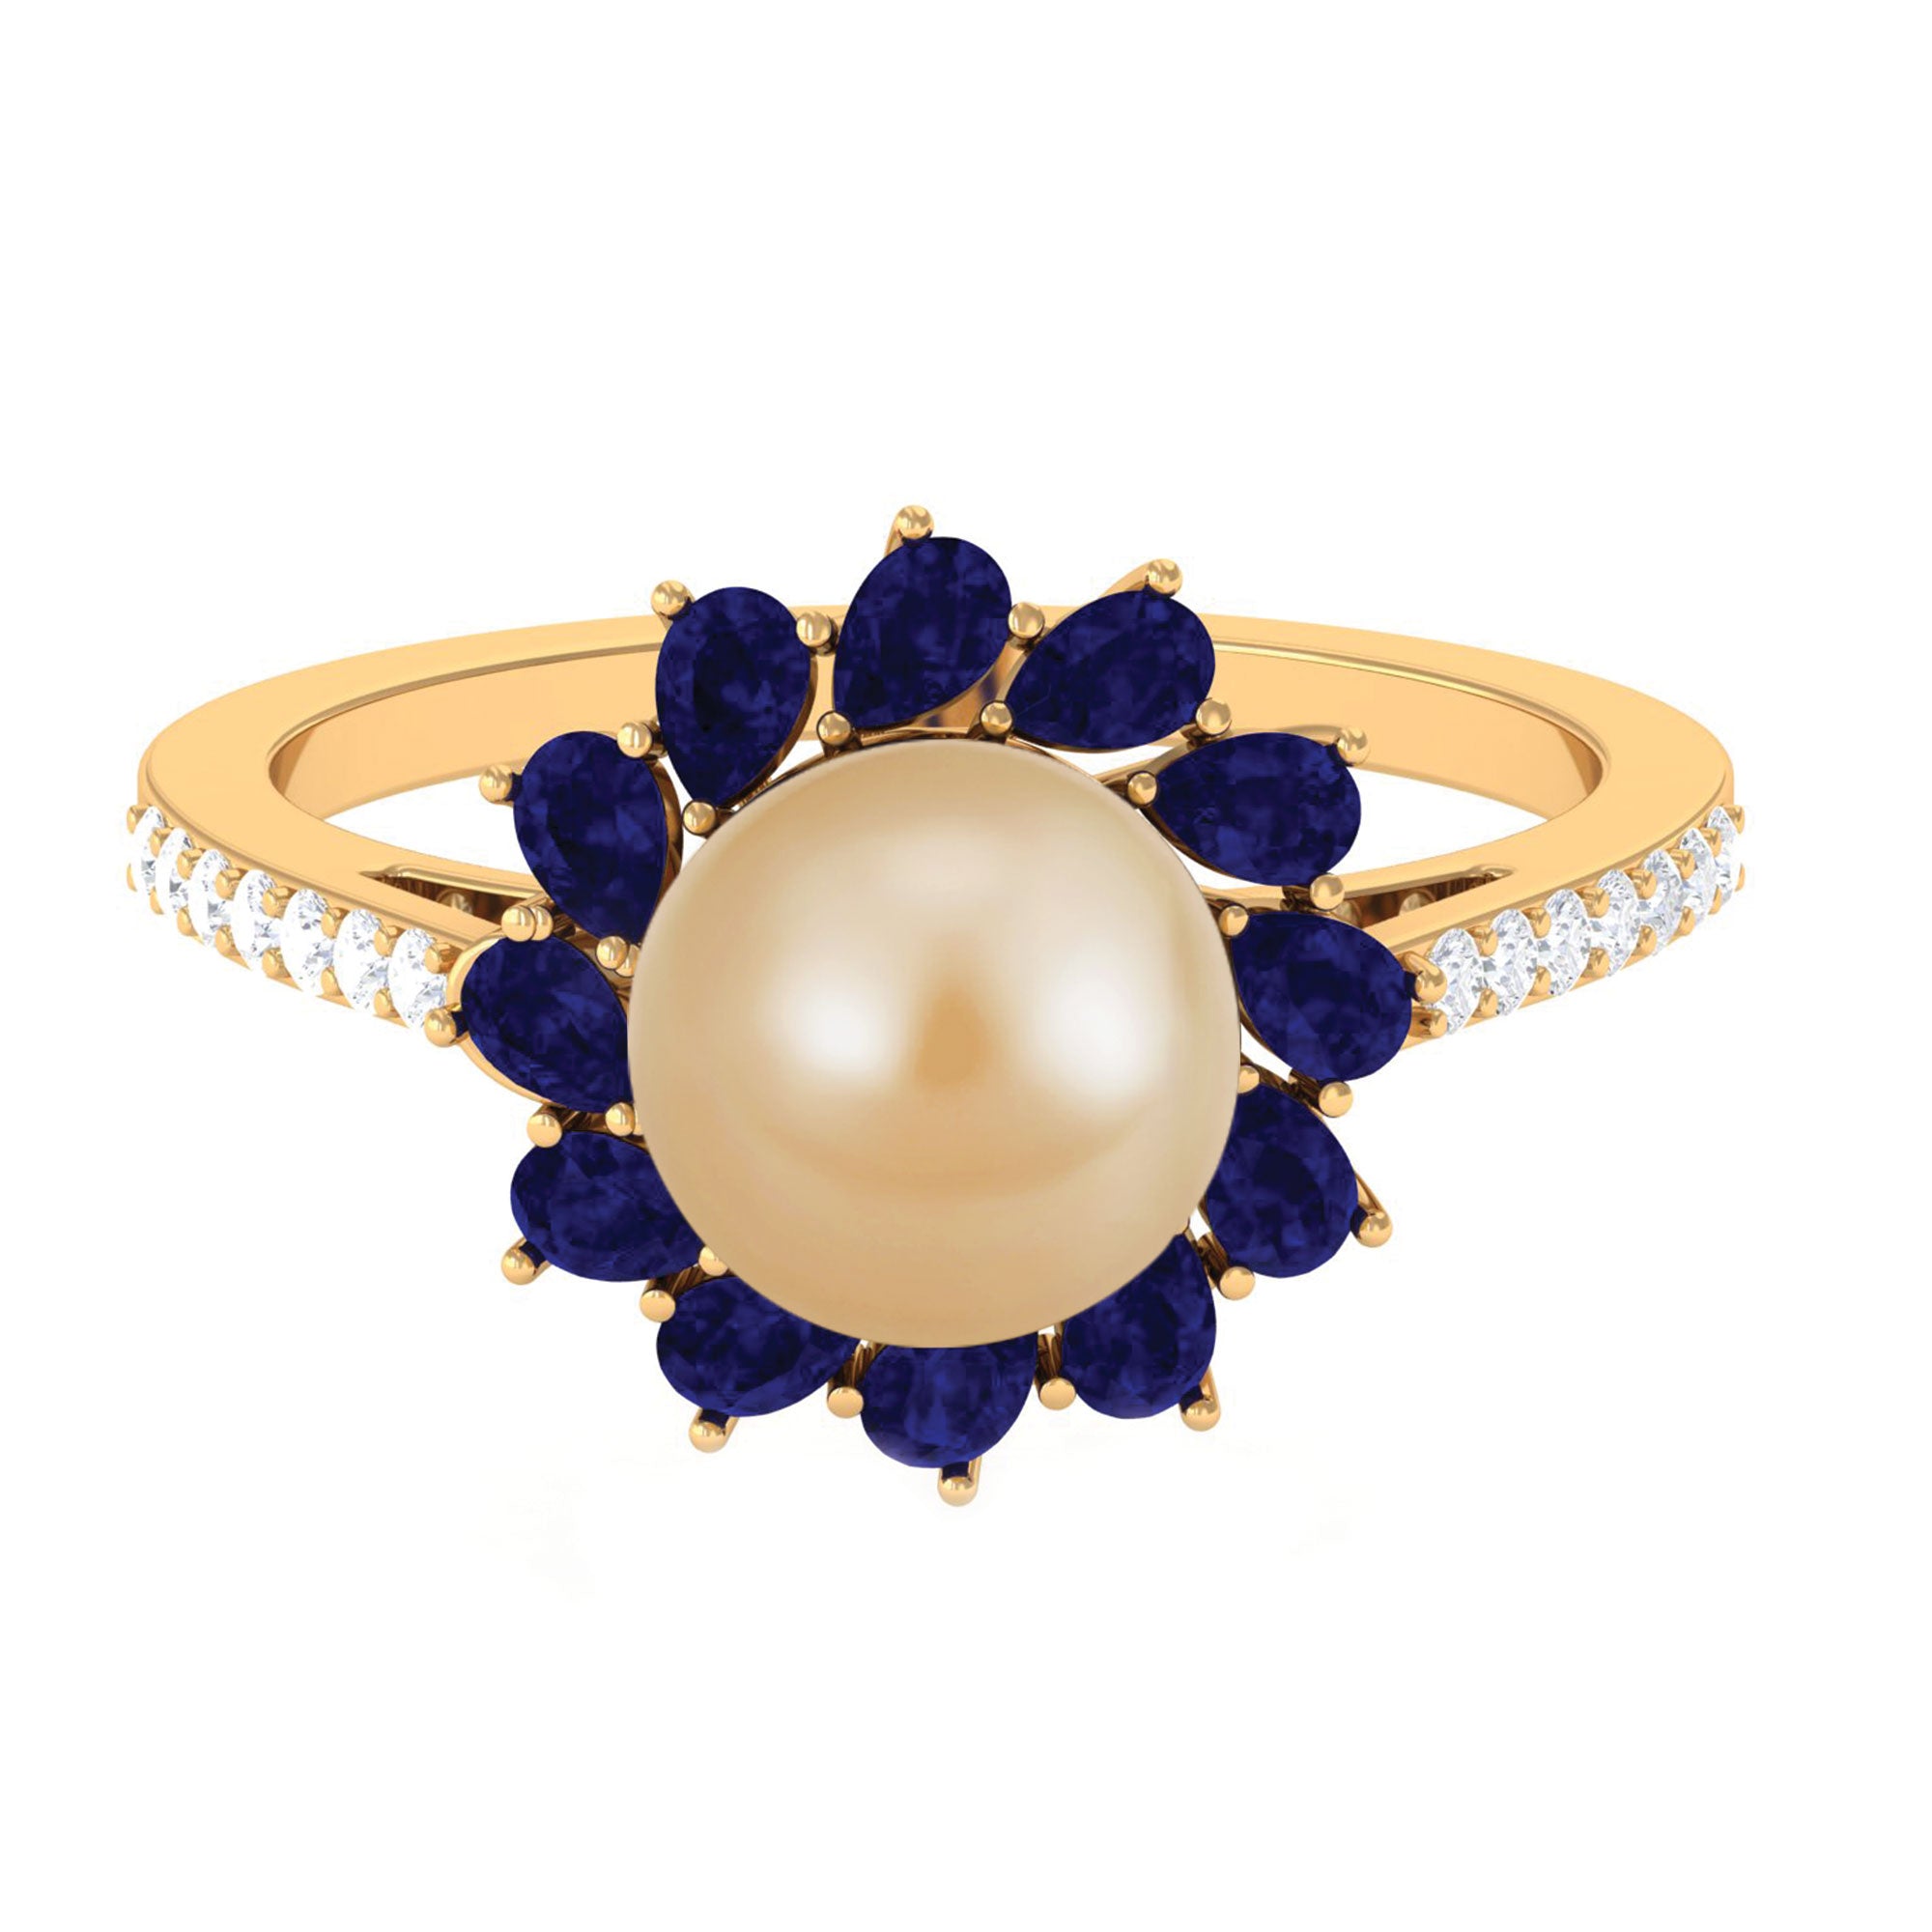 Golden South Sea Pearl Cocktail Halo Ring with Blue Sapphire South Sea Pearl-AAA Quality - Arisha Jewels